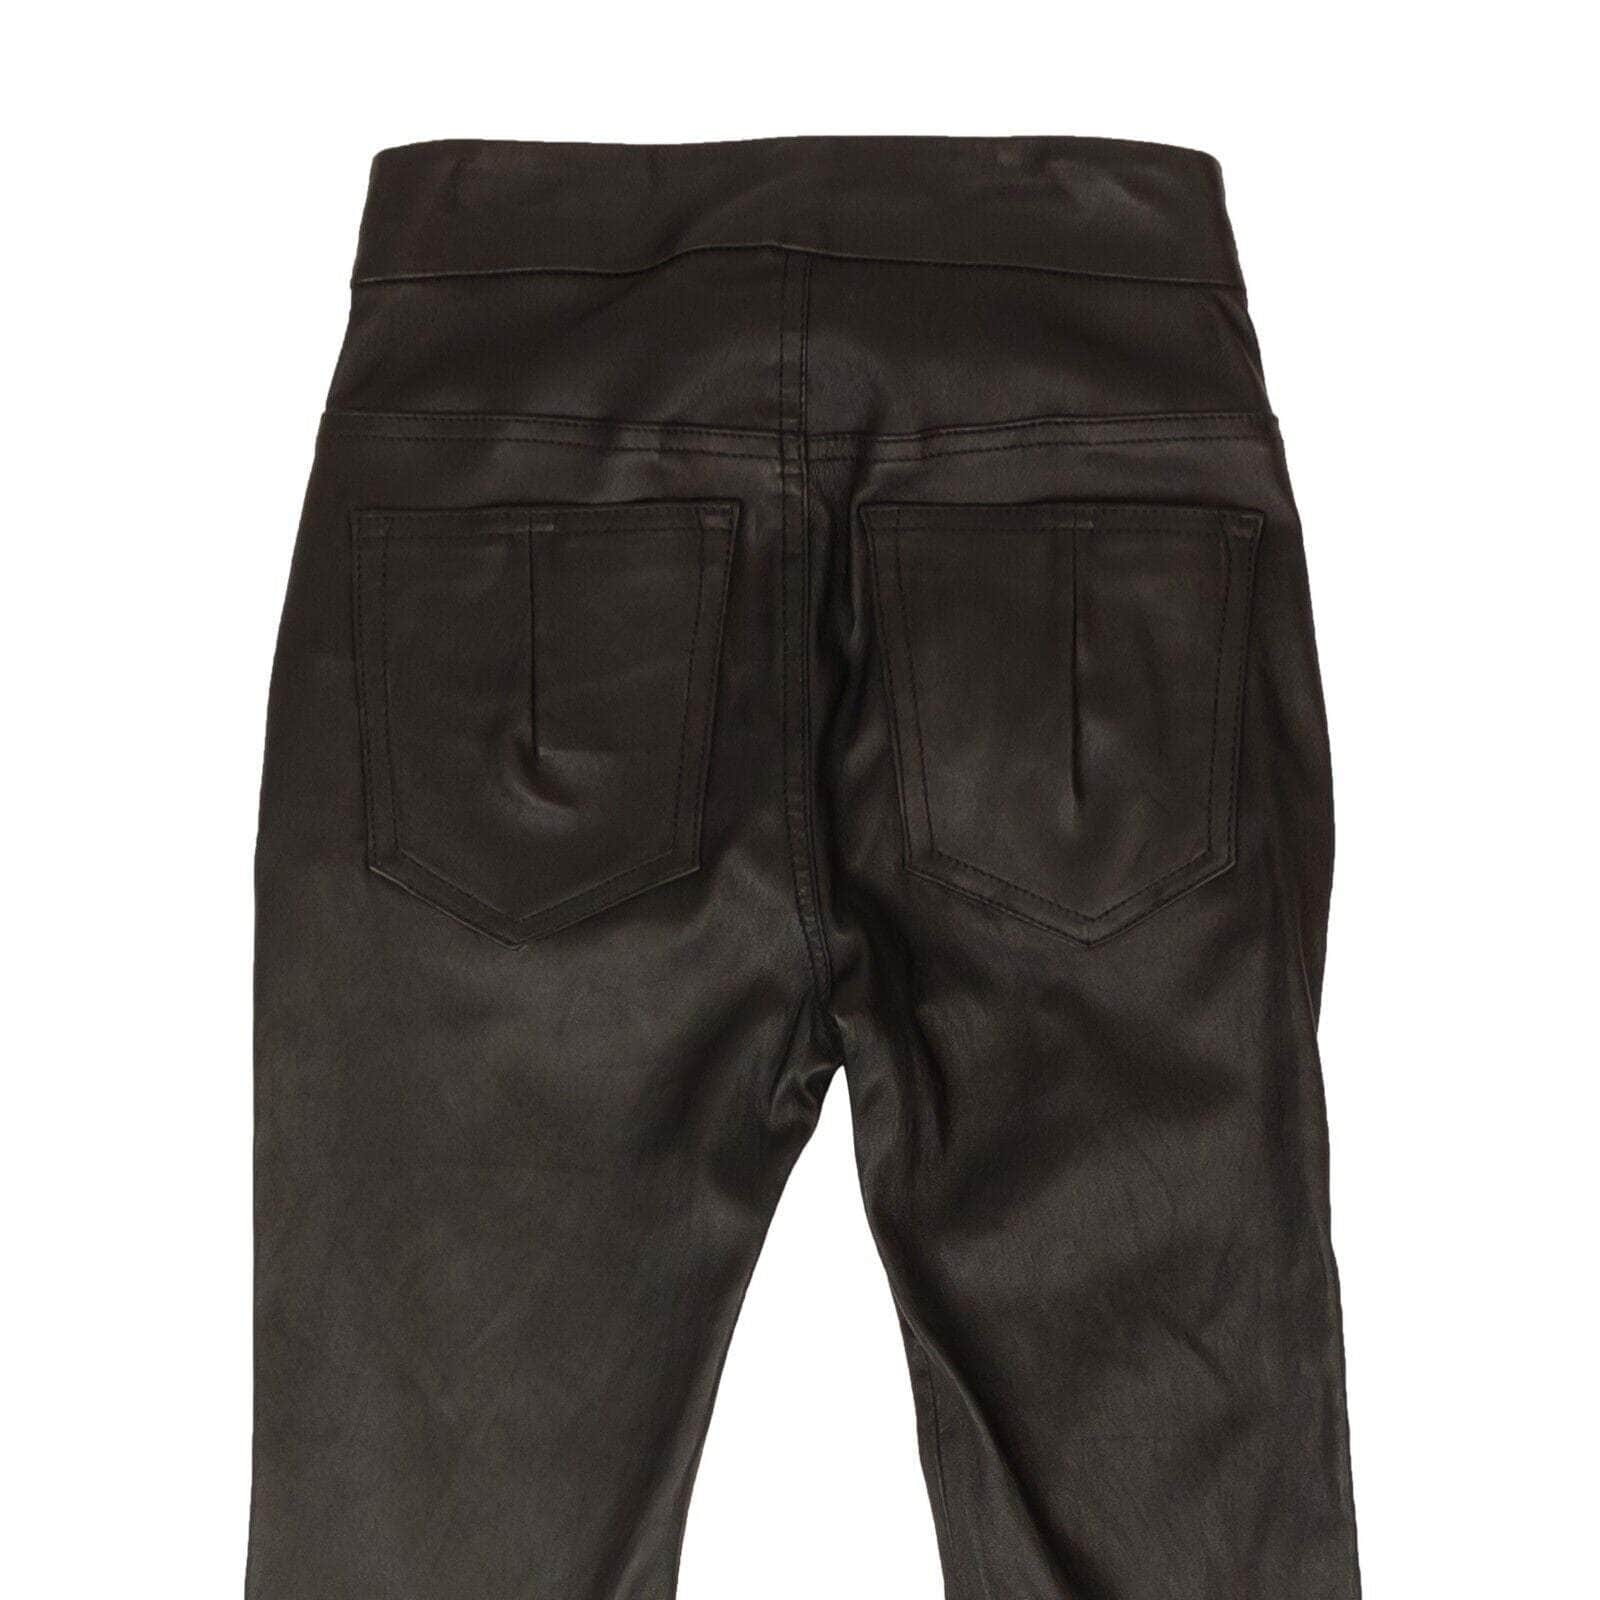 Unravel Project 500-750, channelenable-all, chicmi, couponcollection, gender-womens, main-clothing, size-26, unravel-project, womens-skinny-pants 26 Black Skinny Leather Zipper Pants 82NGG-UN-95/26 82NGG-UN-95/26